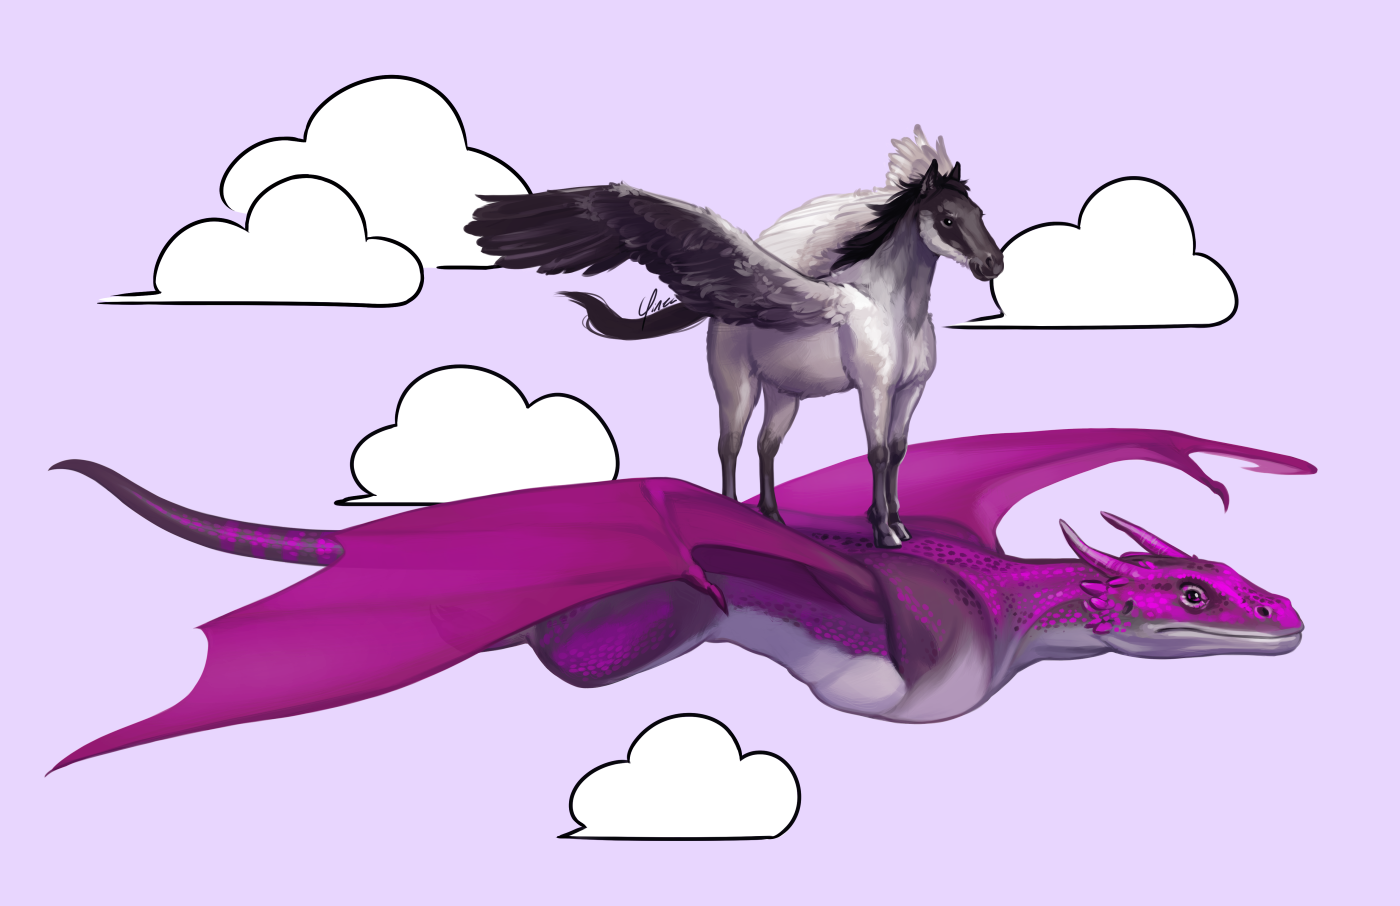 Digital artwork of a pegasus riding atop a wyvern in flight. The pegasus is fluffier than a horse, with coloring similar to a Canada goose, and stands with its wings outstretched, looking ahead. The wyvern is several times larger with a predominantly purple/fuchsia coloring and light grey underbelly. Its wings are outstretched in flight. The background is a light purple with flat white cartoon clouds.